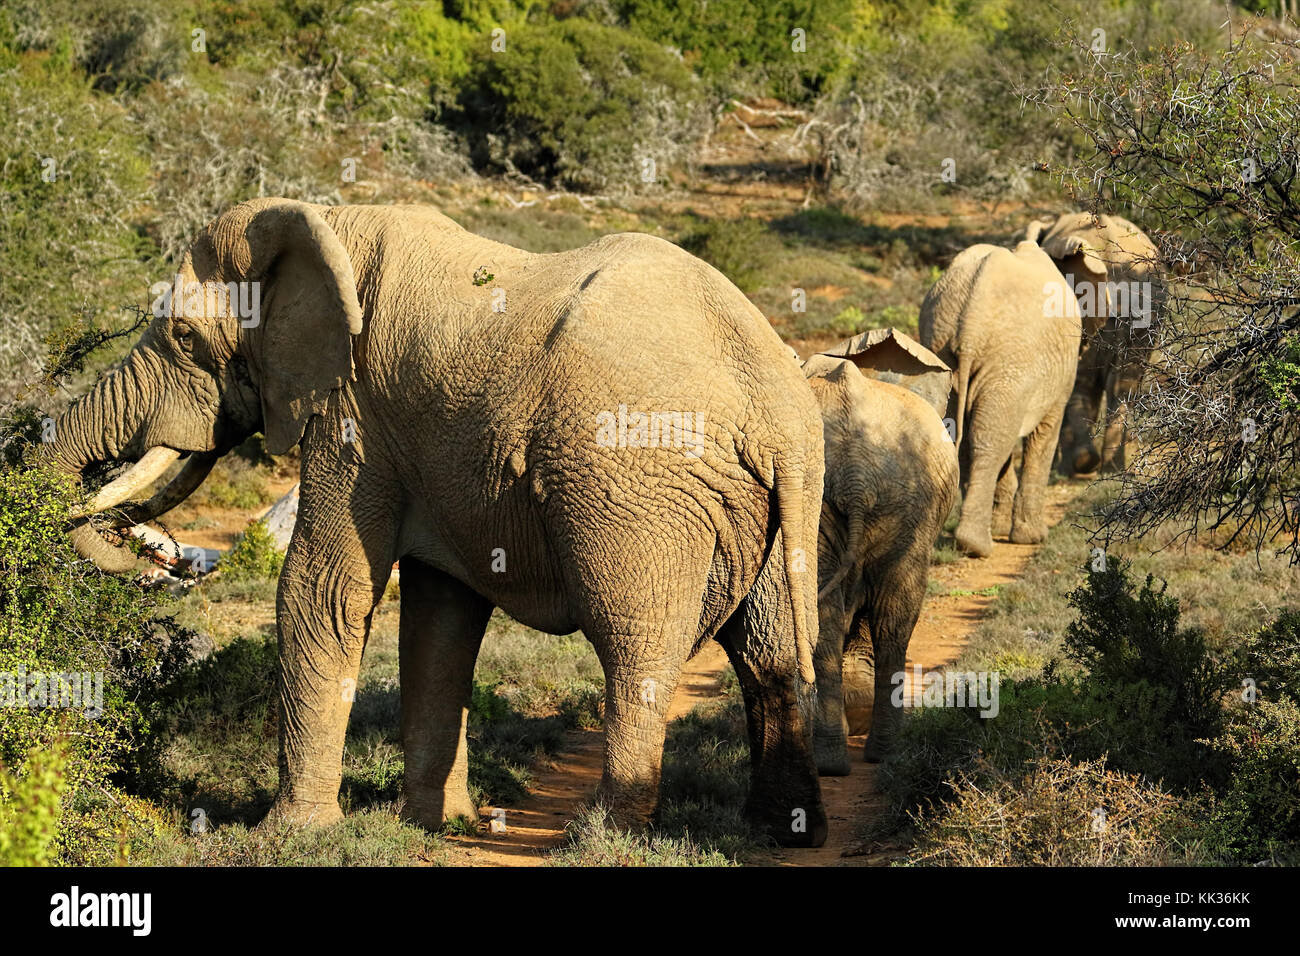 Elephants in the Addo Elephants National Park, South Africa. Stock Photo